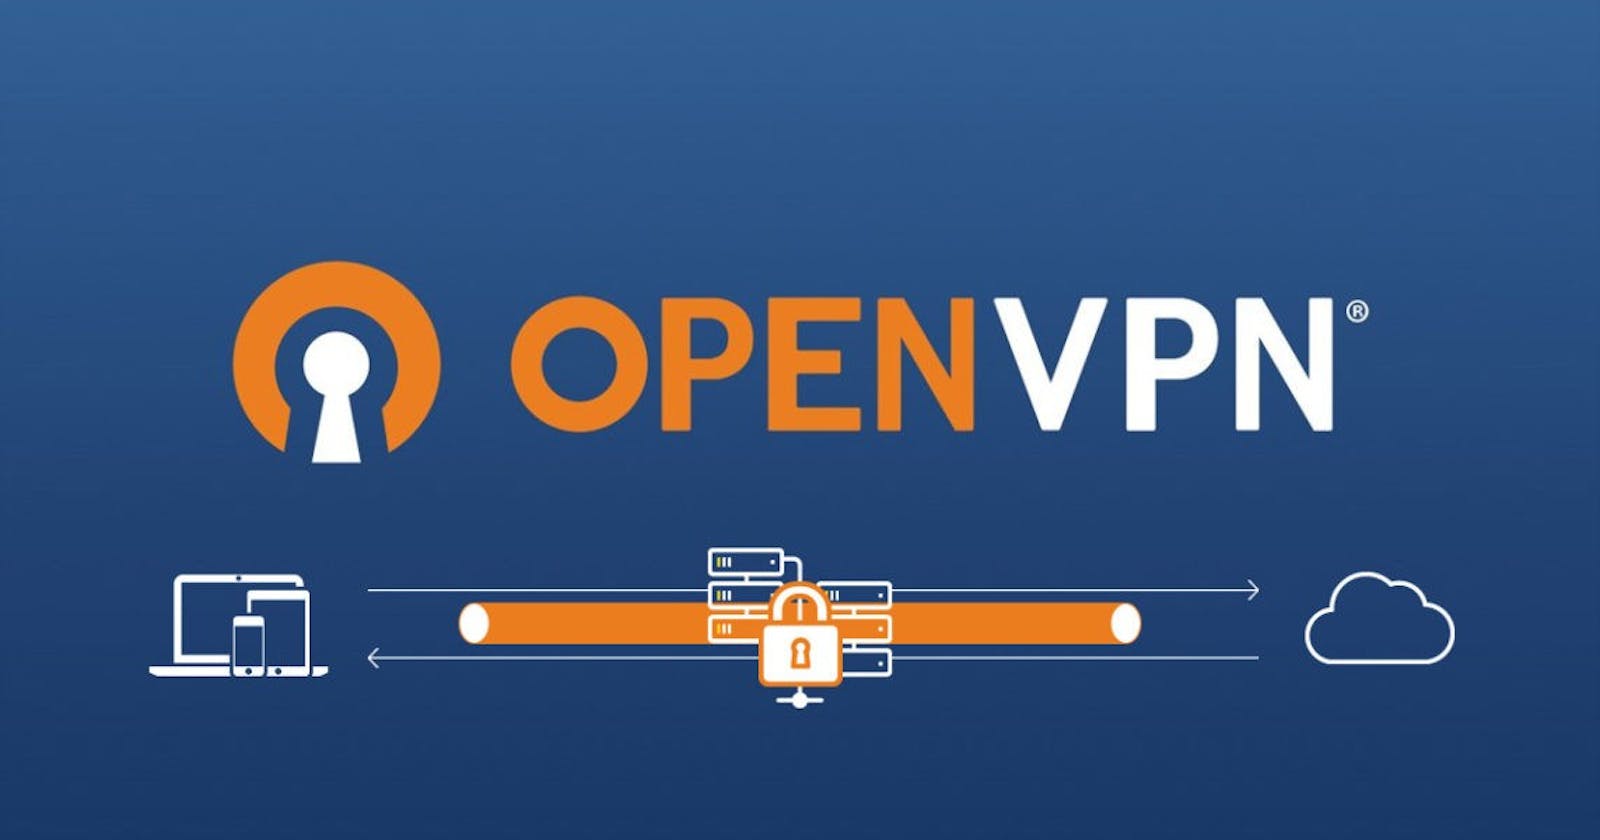 Here's how to connect to the OpenVPN server from Arch linux Client using OpenVPN client